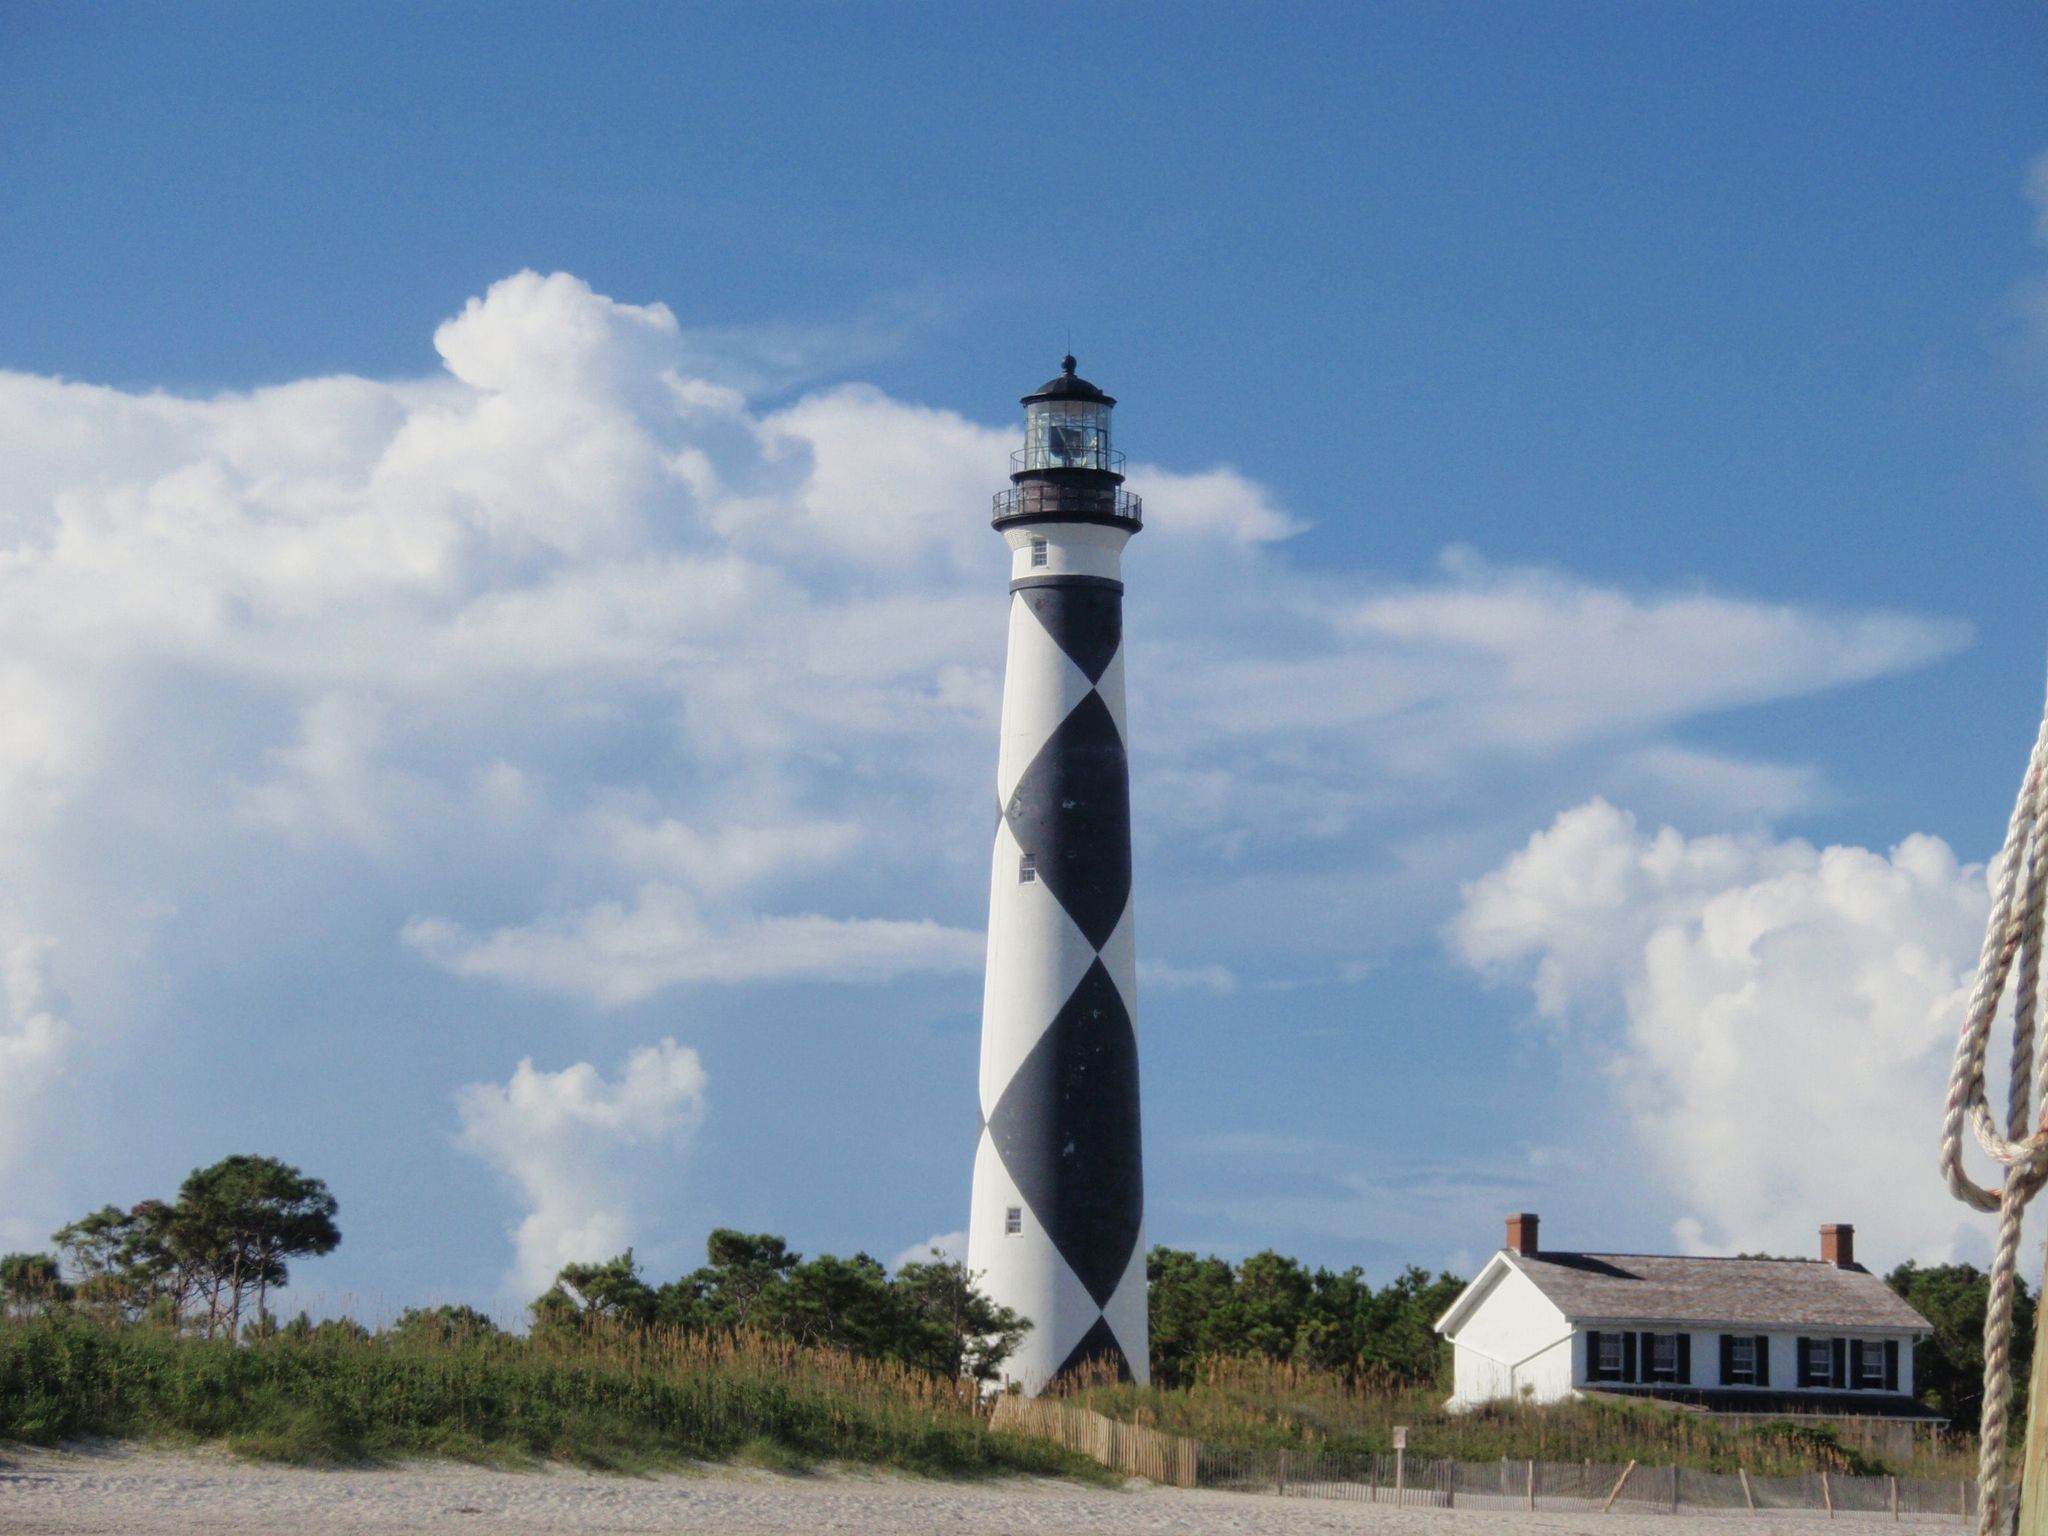 The Cape Lookout Lighthouse is still an active aid-to-navigation, warning ships of the nearby shoals.  Climbing to up to see the view from the gallery level, 14 stories above the ground, is also a popular activity by visitors during the summer.